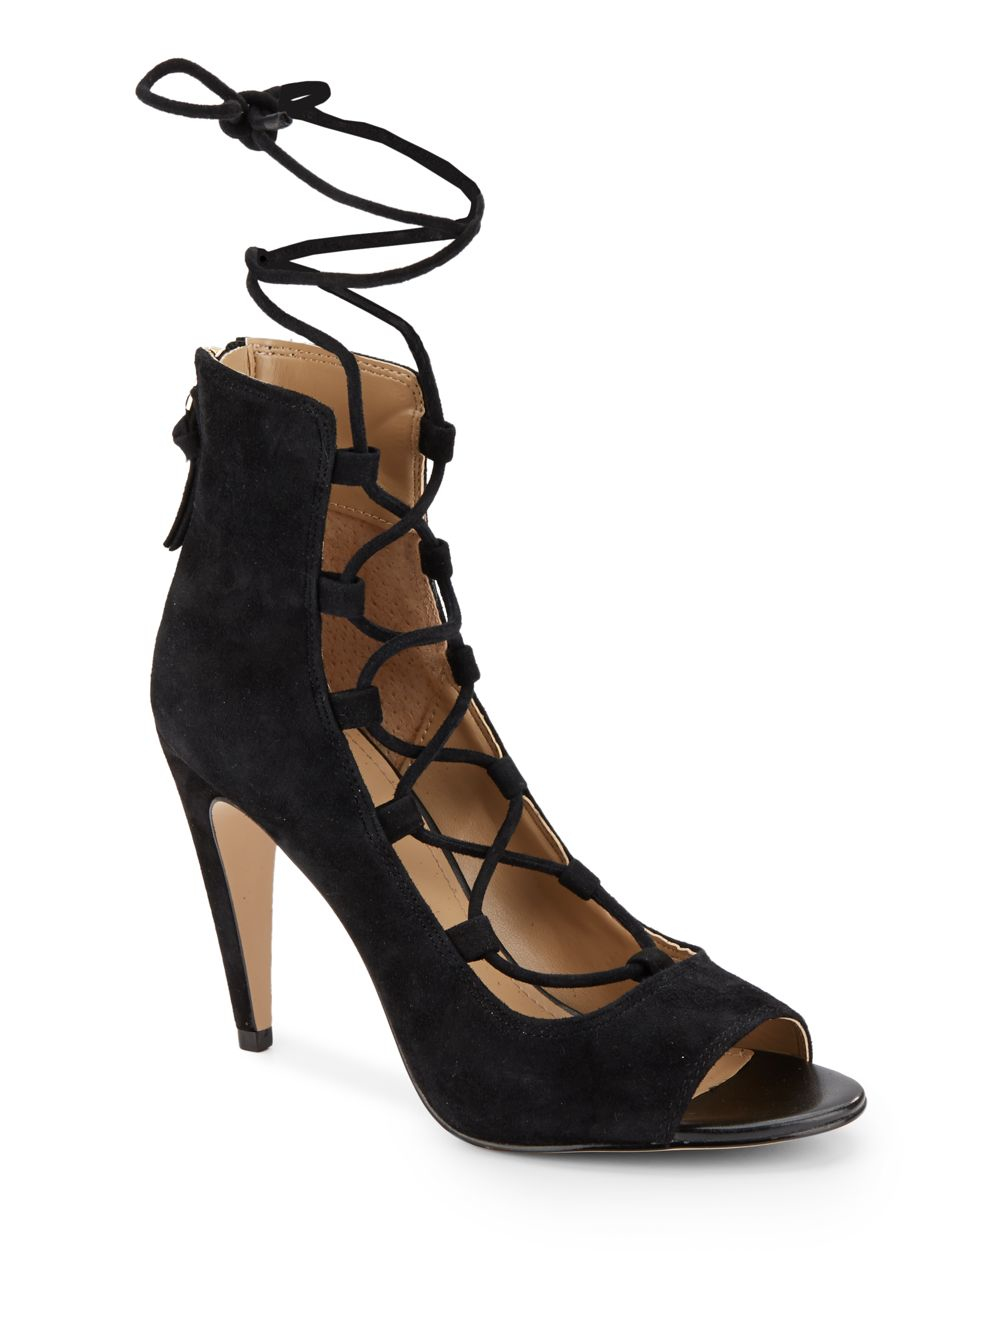 Saks fifth avenue Naylee Lace-up Suede Sandals in Black | Lyst